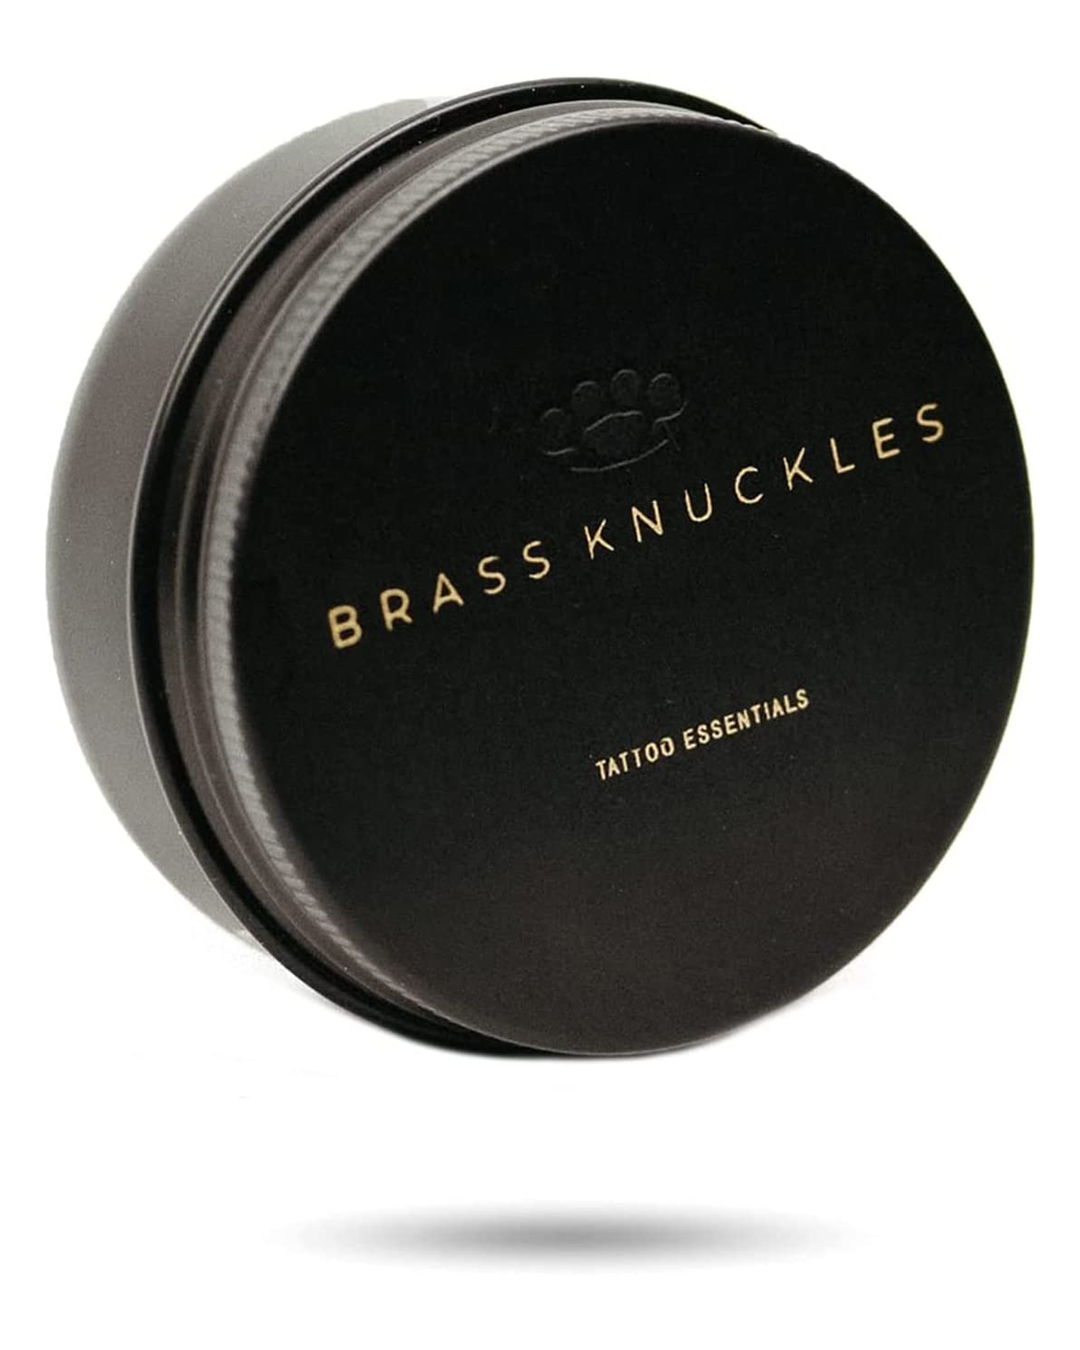 Brass Knuckles tattoo aftercare